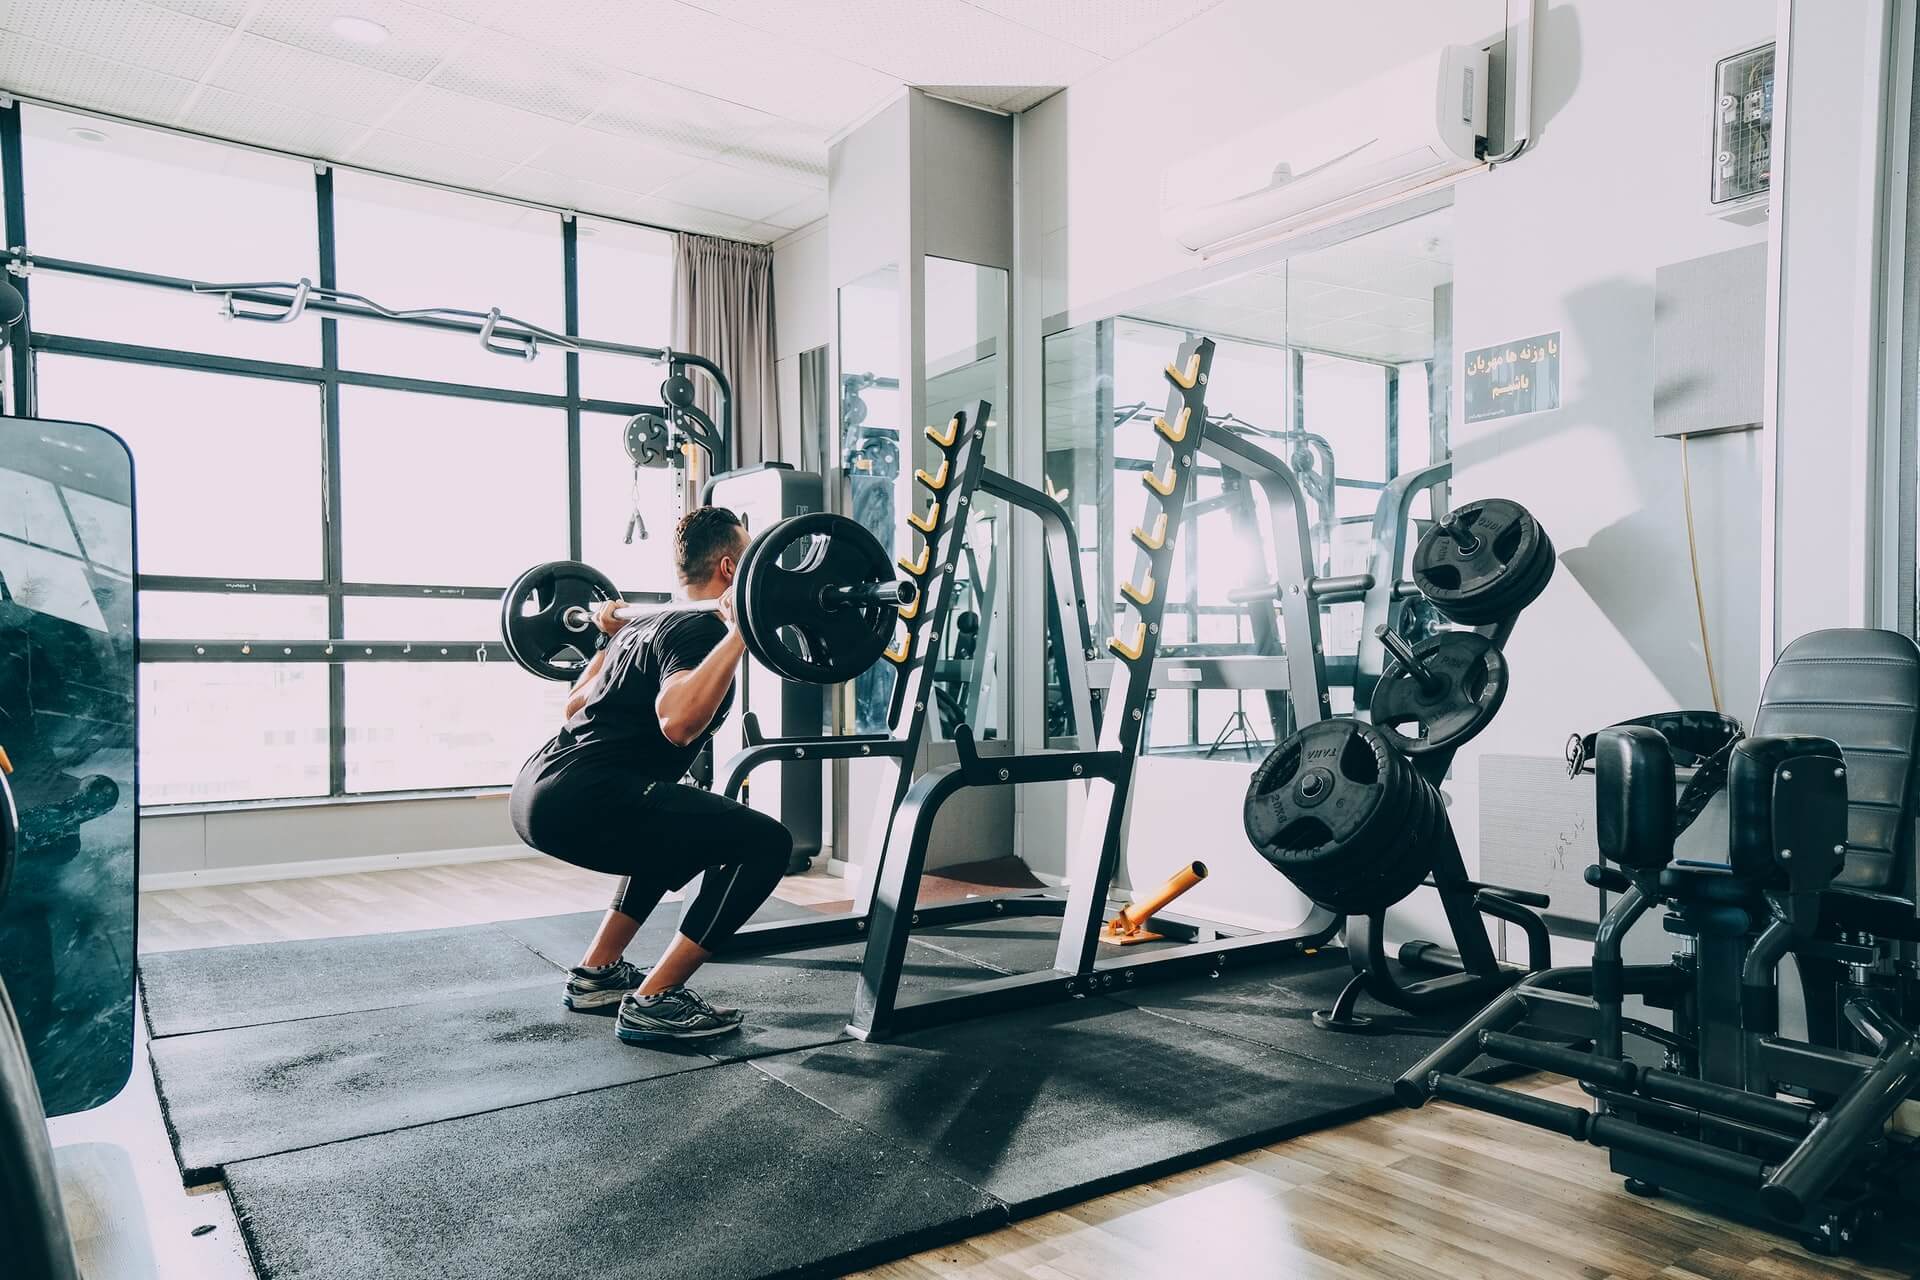 9 Tips To Maintain Home Gym Equipment